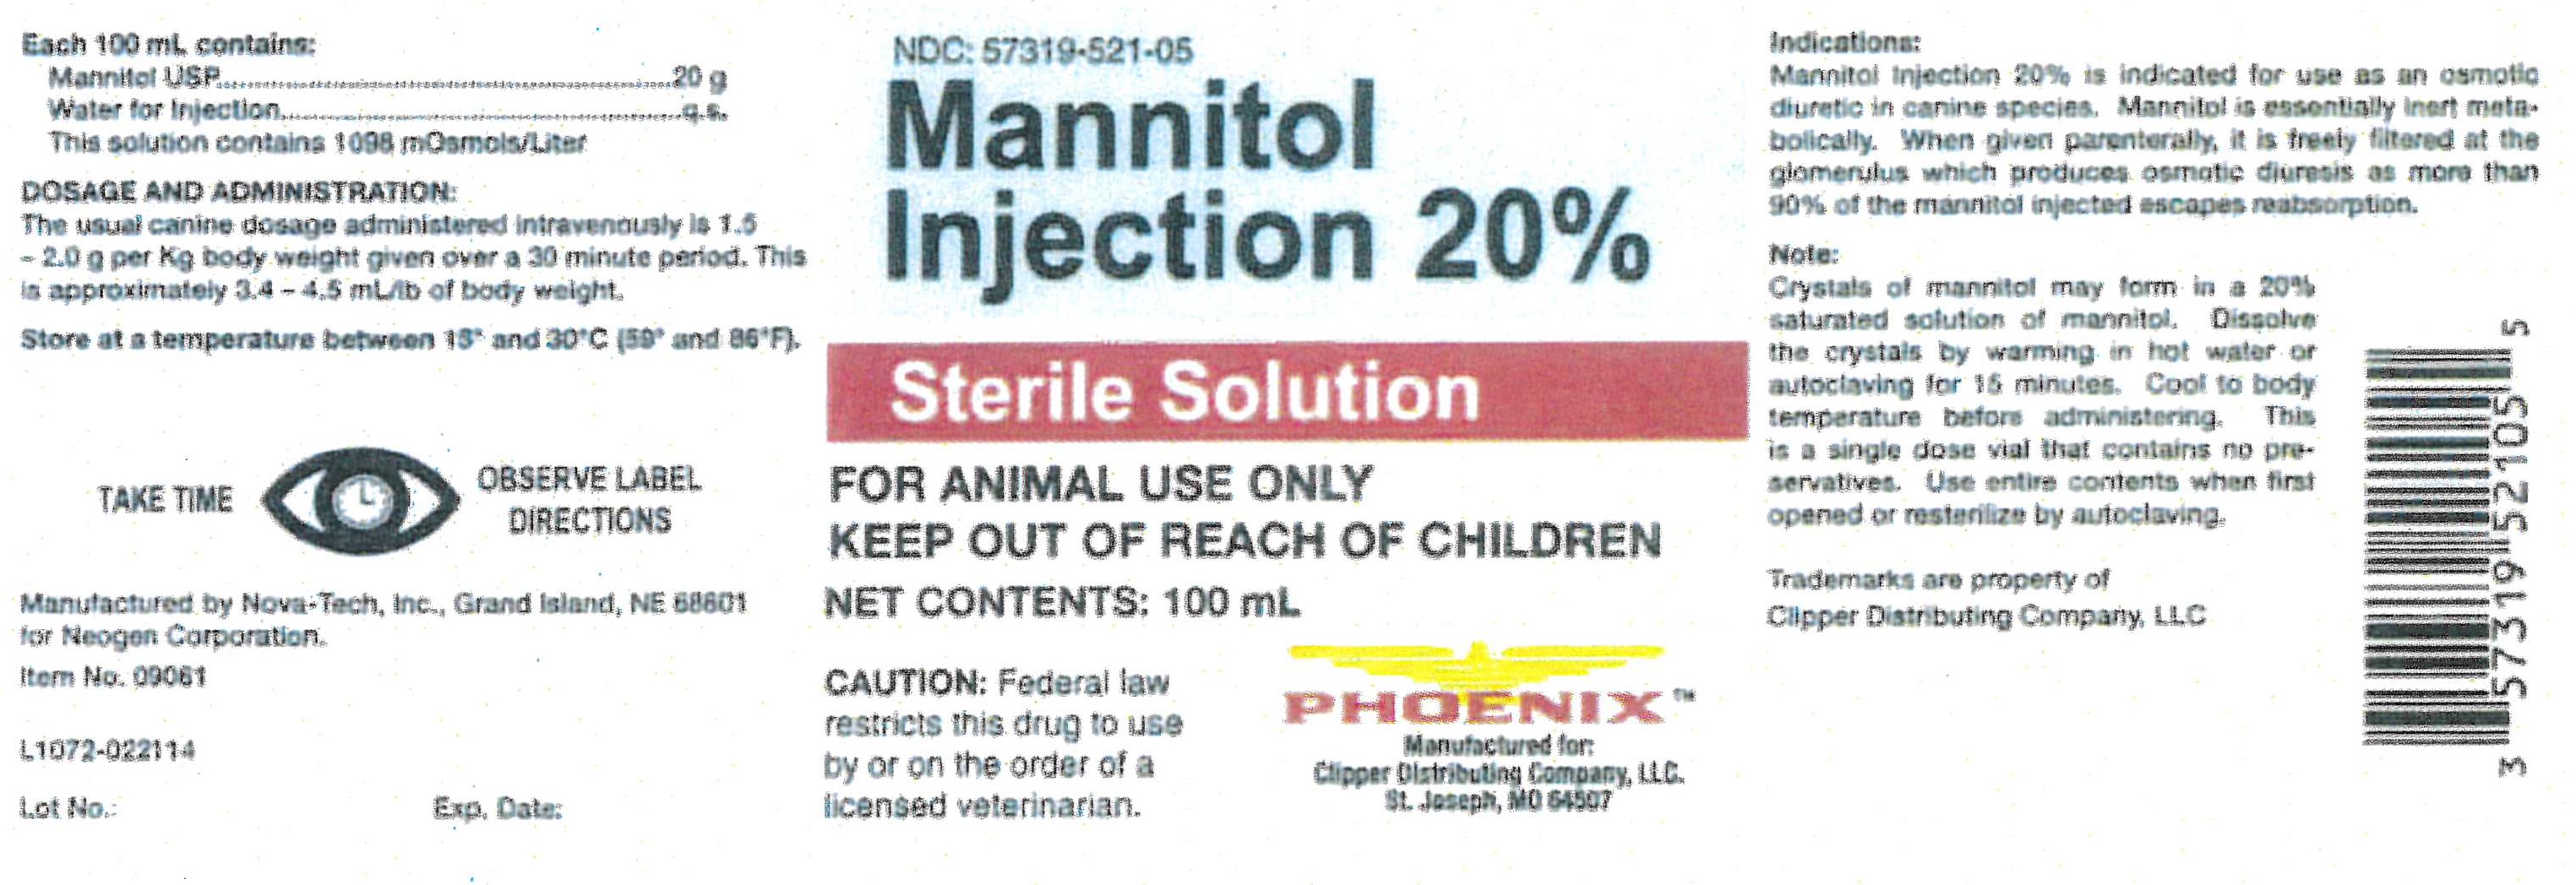 Mannitol 20%